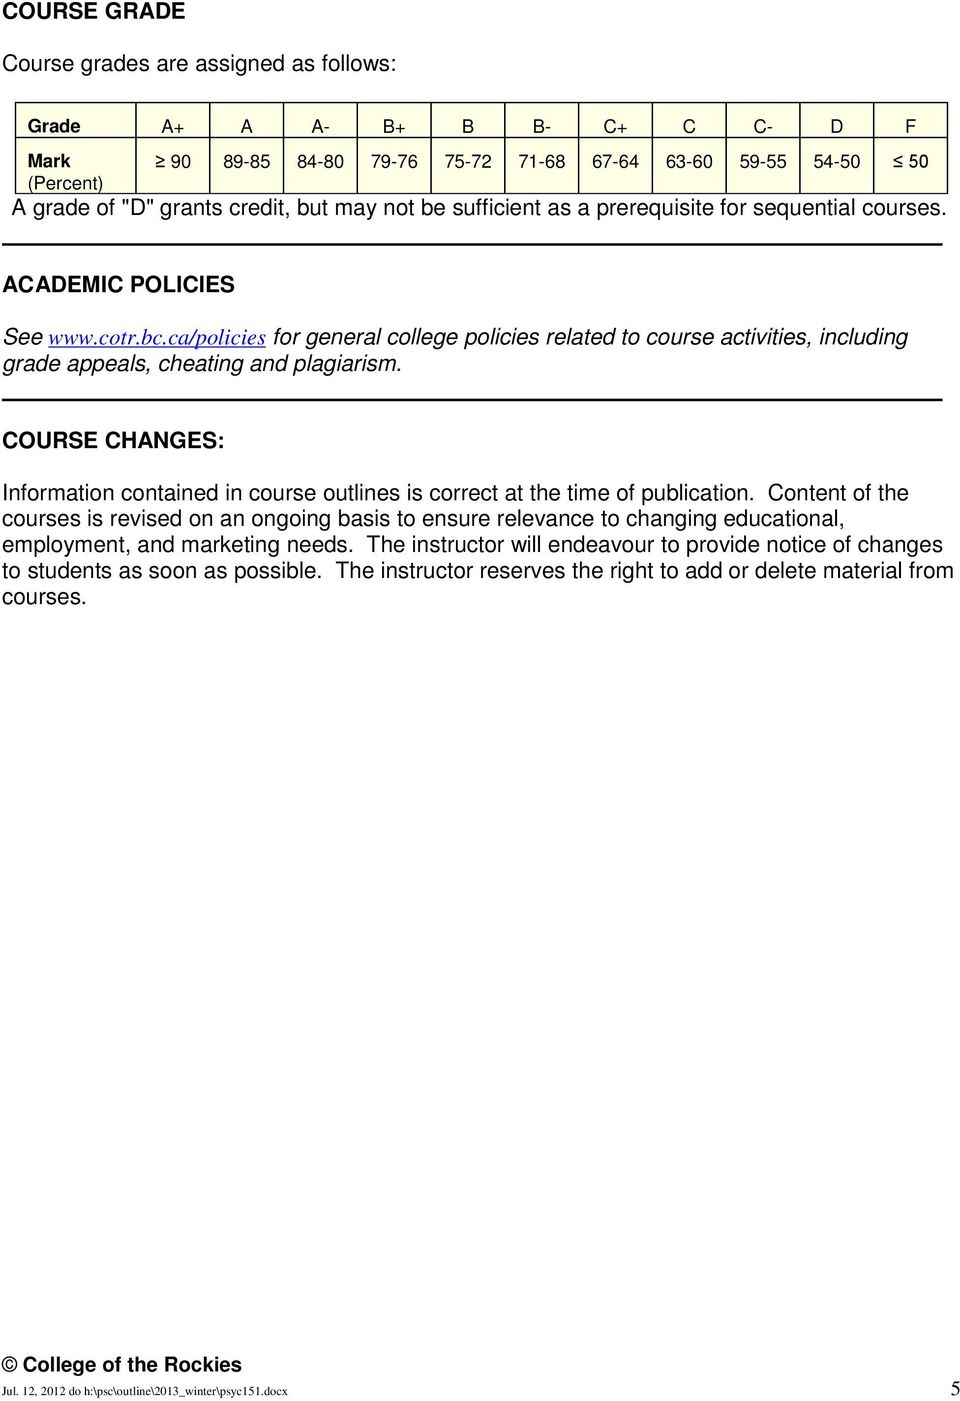 ca/policies for general college policies related to course activities, including grade appeals, cheating and plagiarism.